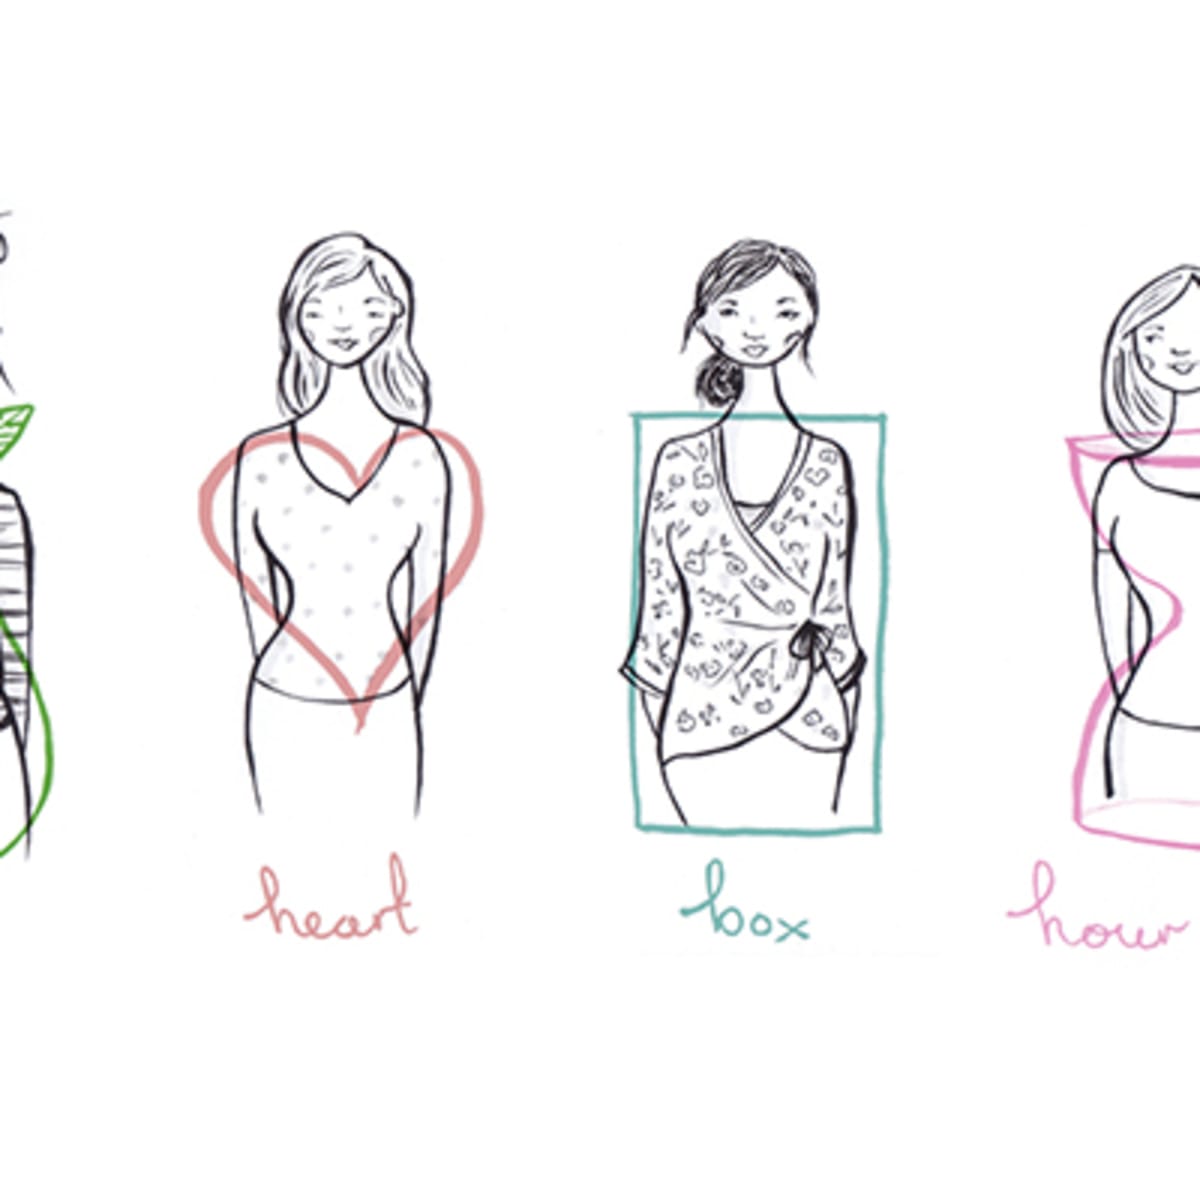 How to choose the right neckline for your body type and shape of body